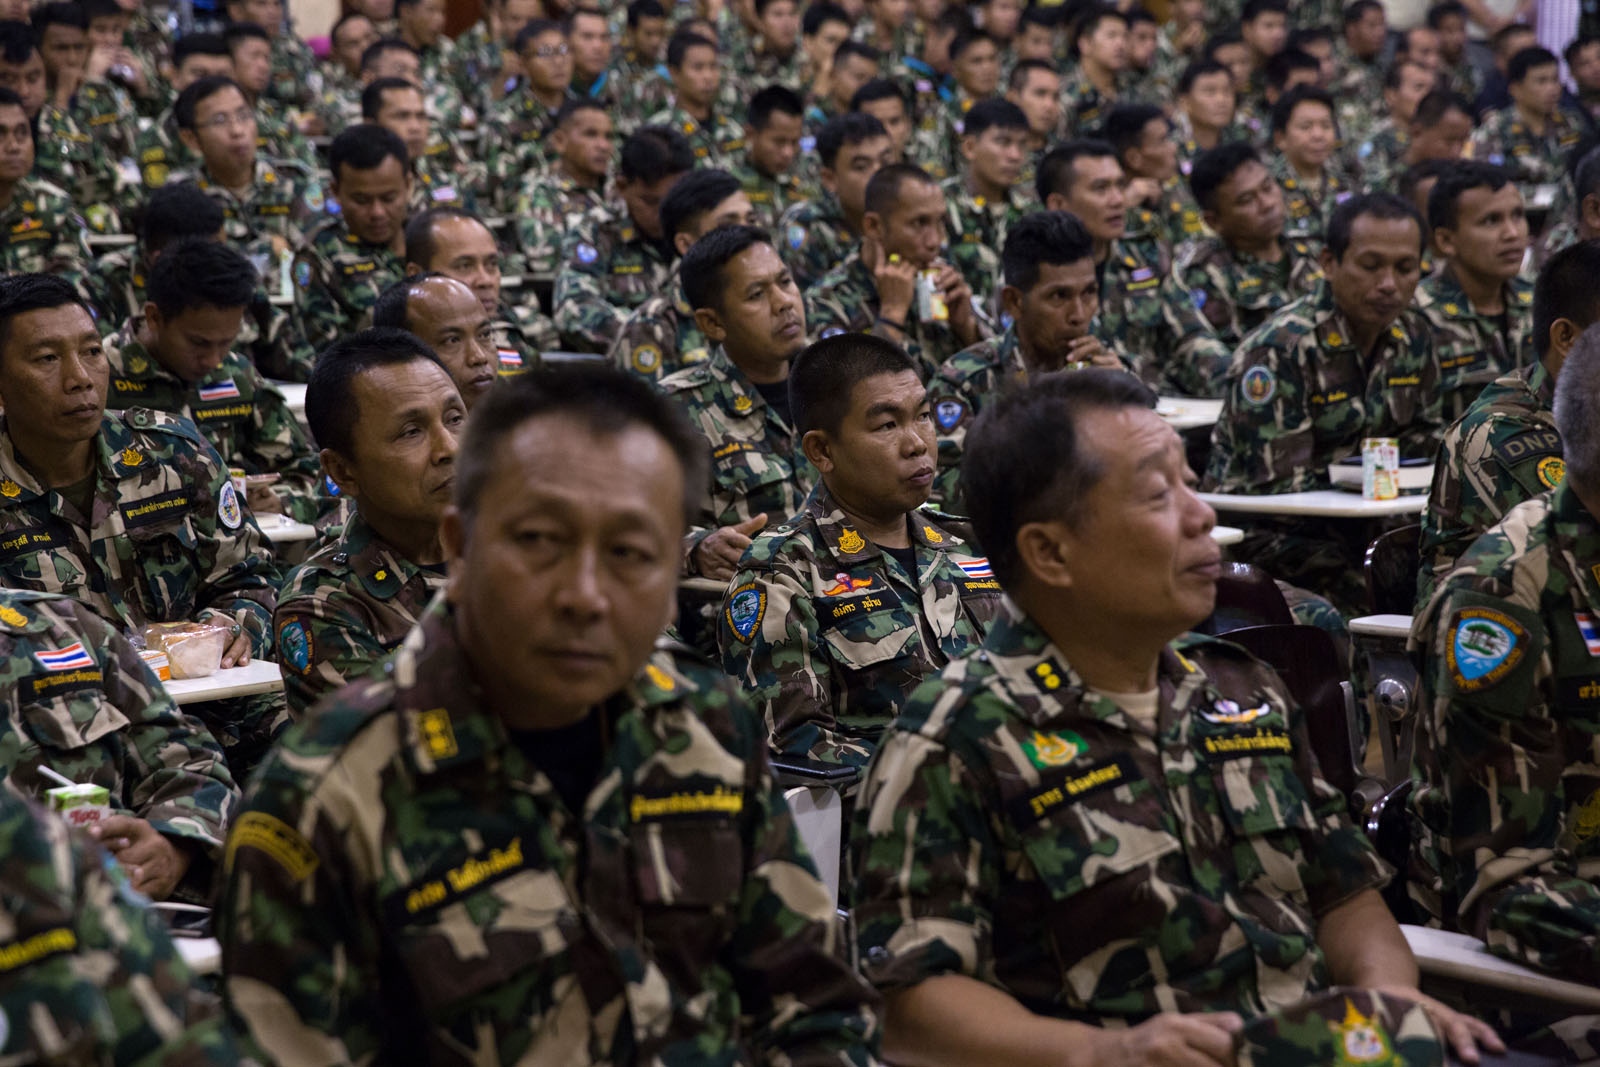 PROTECTING THAILANDS ROSEWOOD - Rangers attend a conference during World Ranger Day 2018...